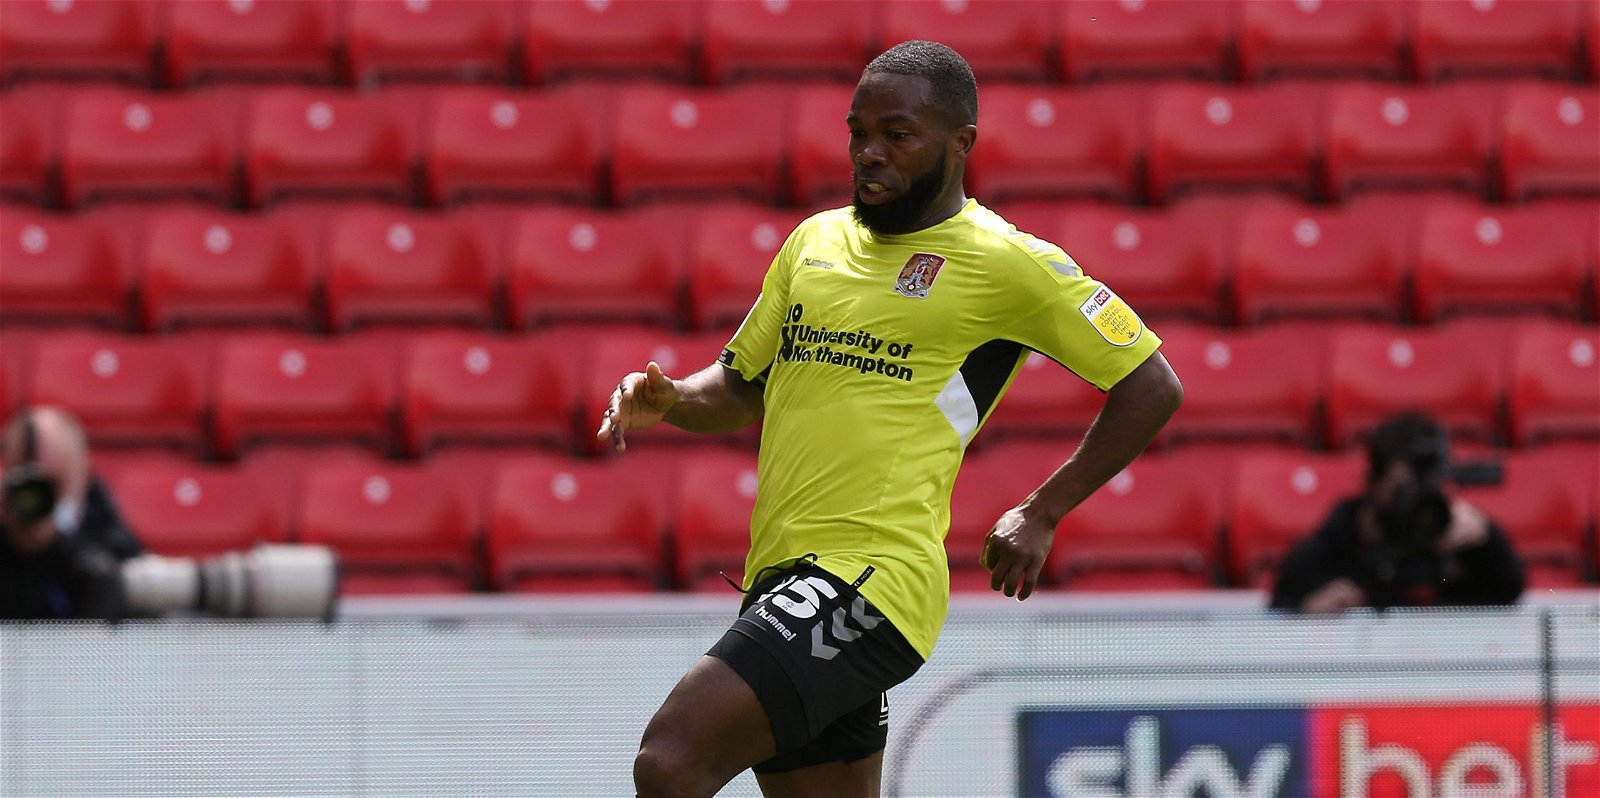 Crawley Town Northampton Town, Crawley Town sign Mark Marshall after Northampton Town exit